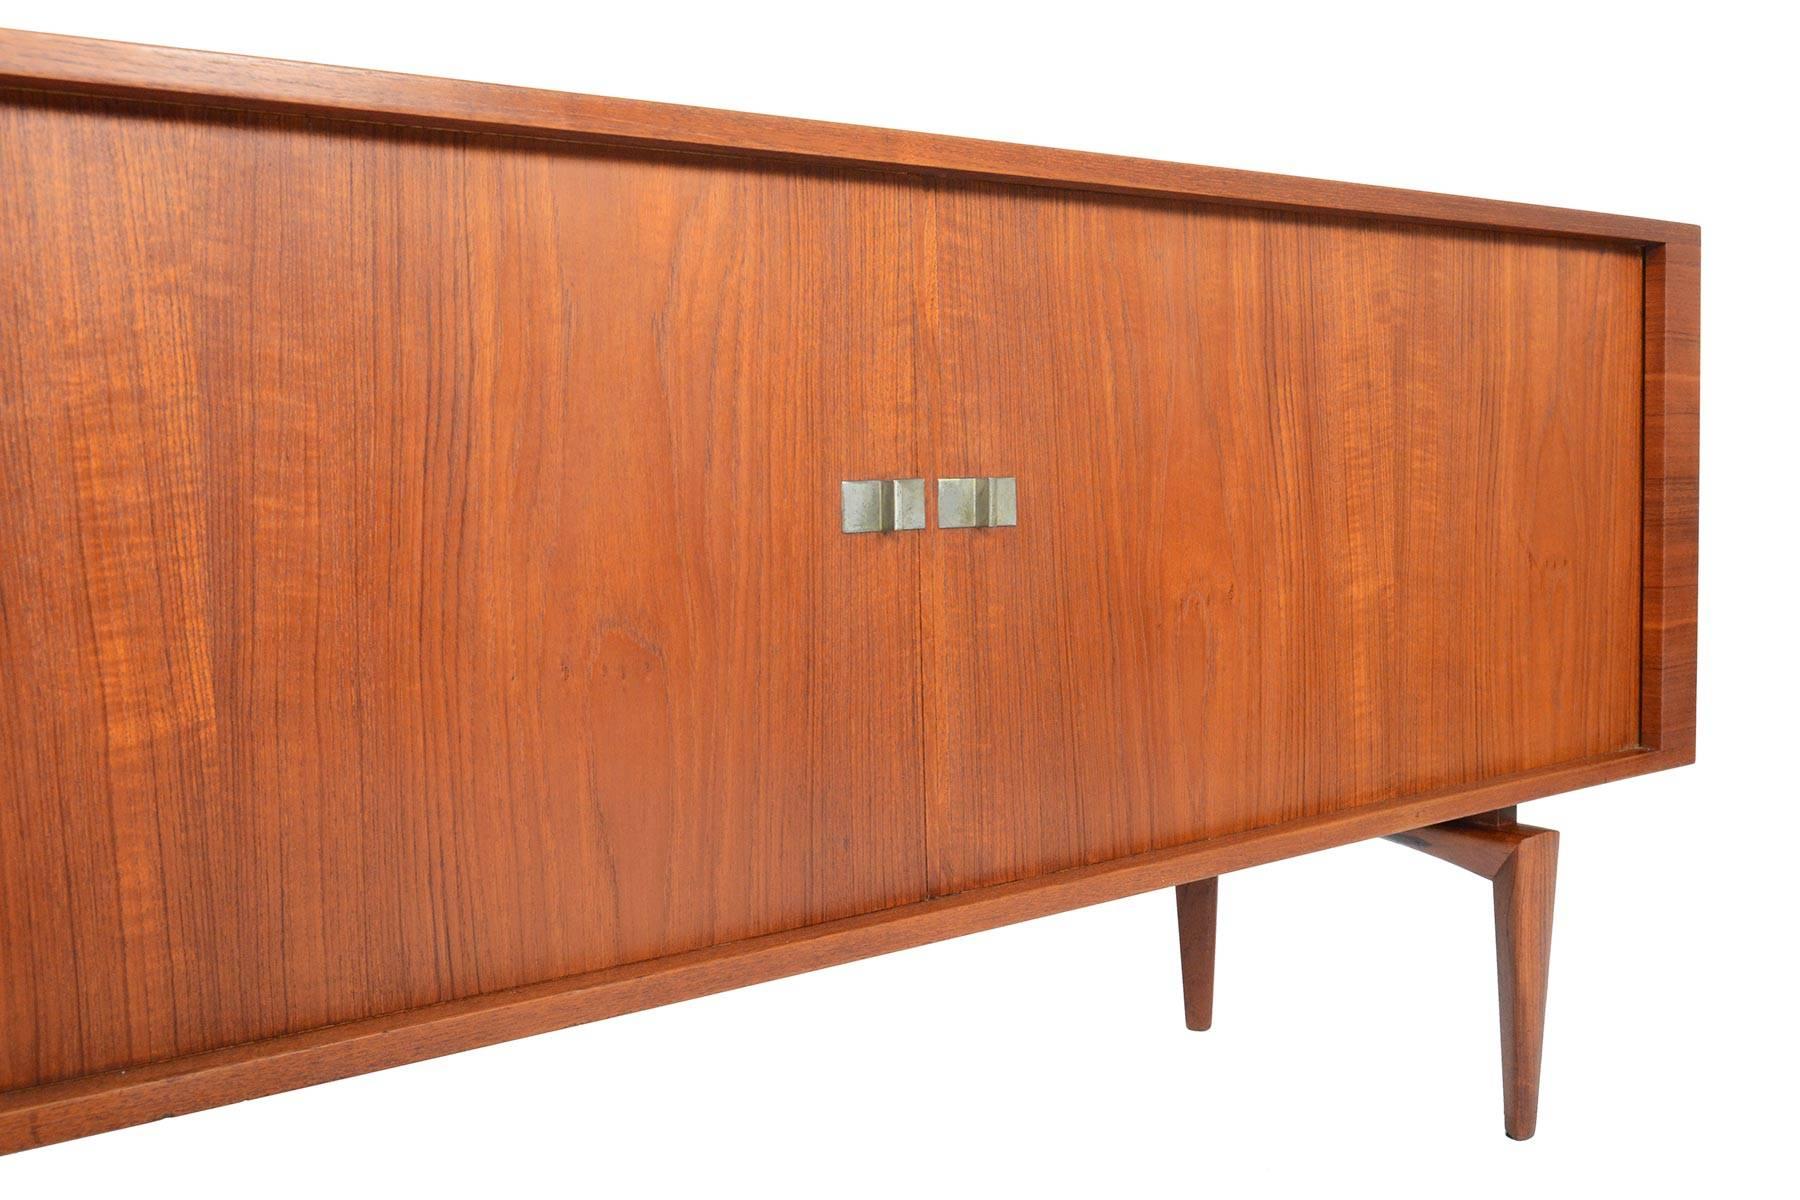 Large Refinished Teak Tambour Credenza by H.W. Klein for Bramin 1